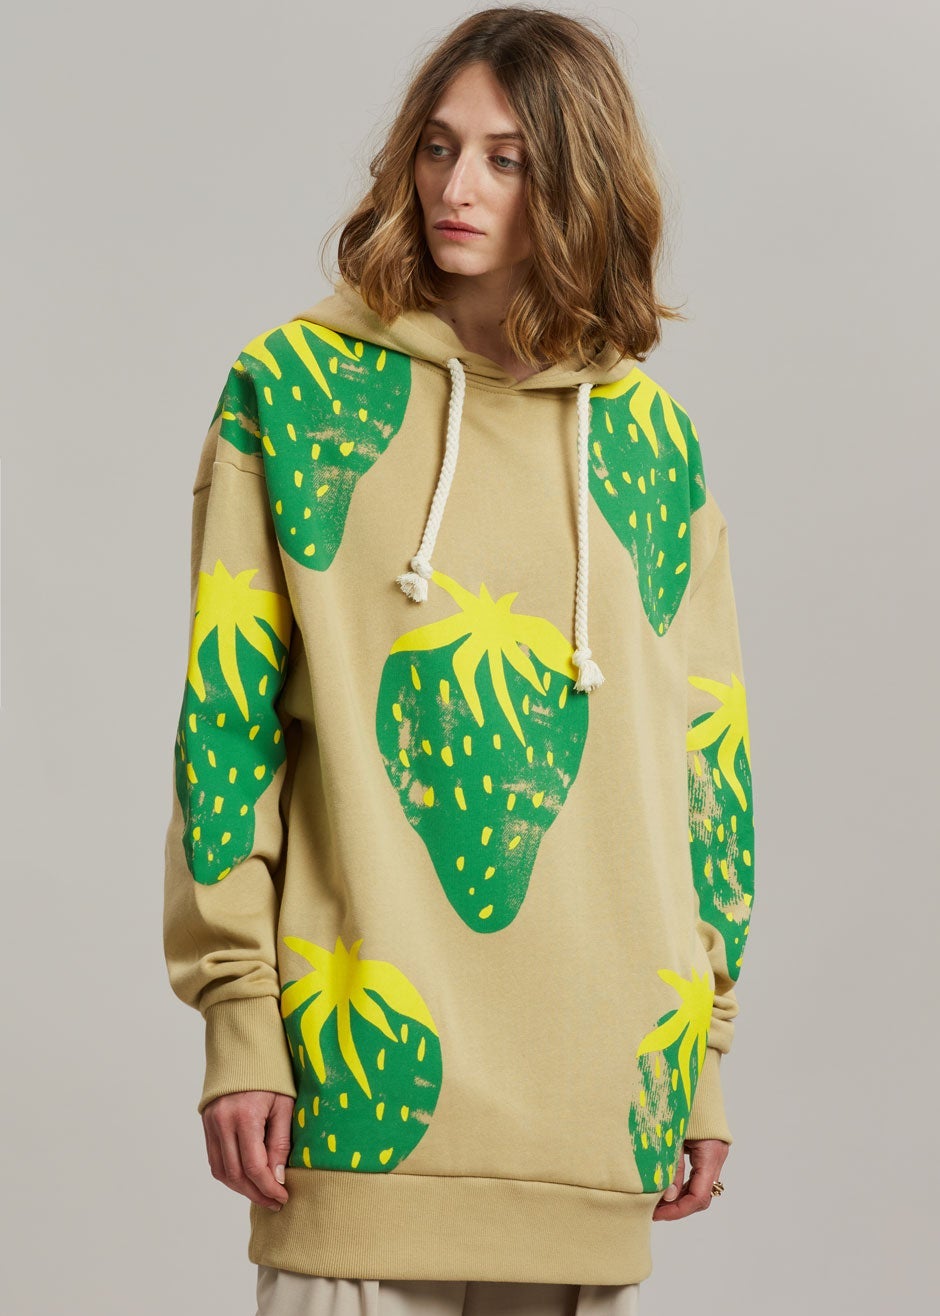 JW Anderson Strawberry Hoodie - Natural/Green - 3